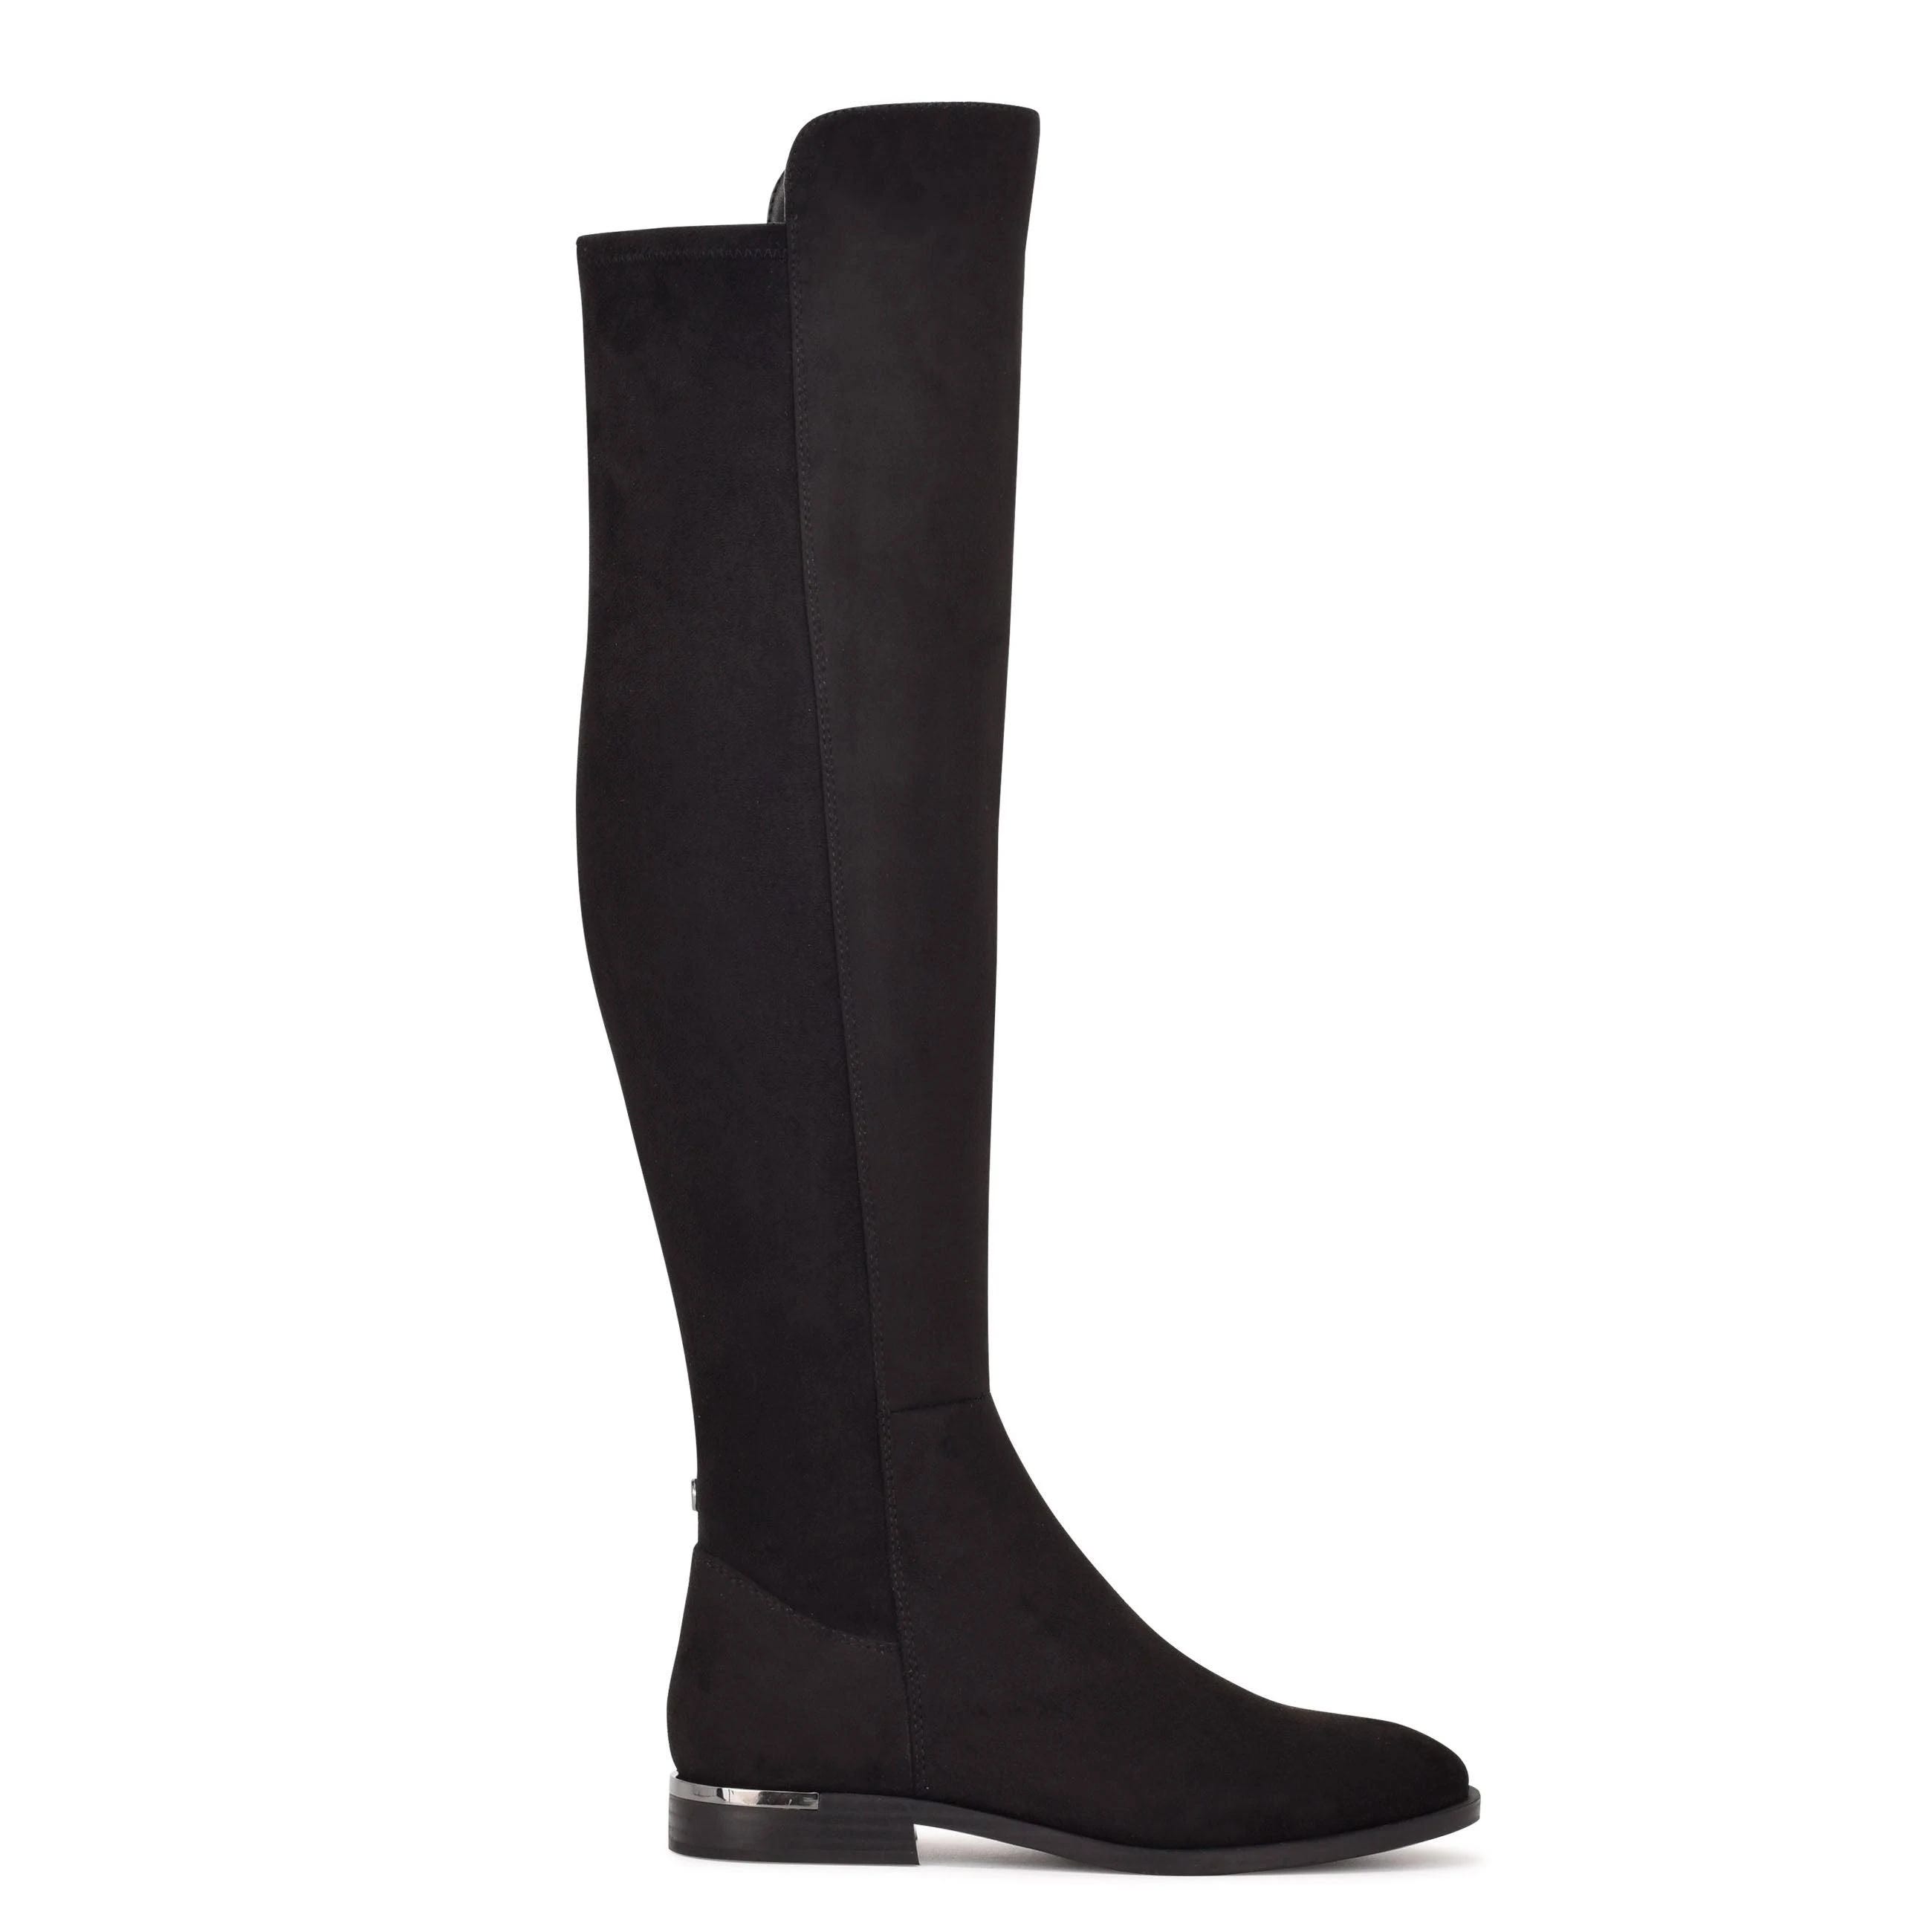 Allair Over the Knee Boots: Classic Style for Fall | Image